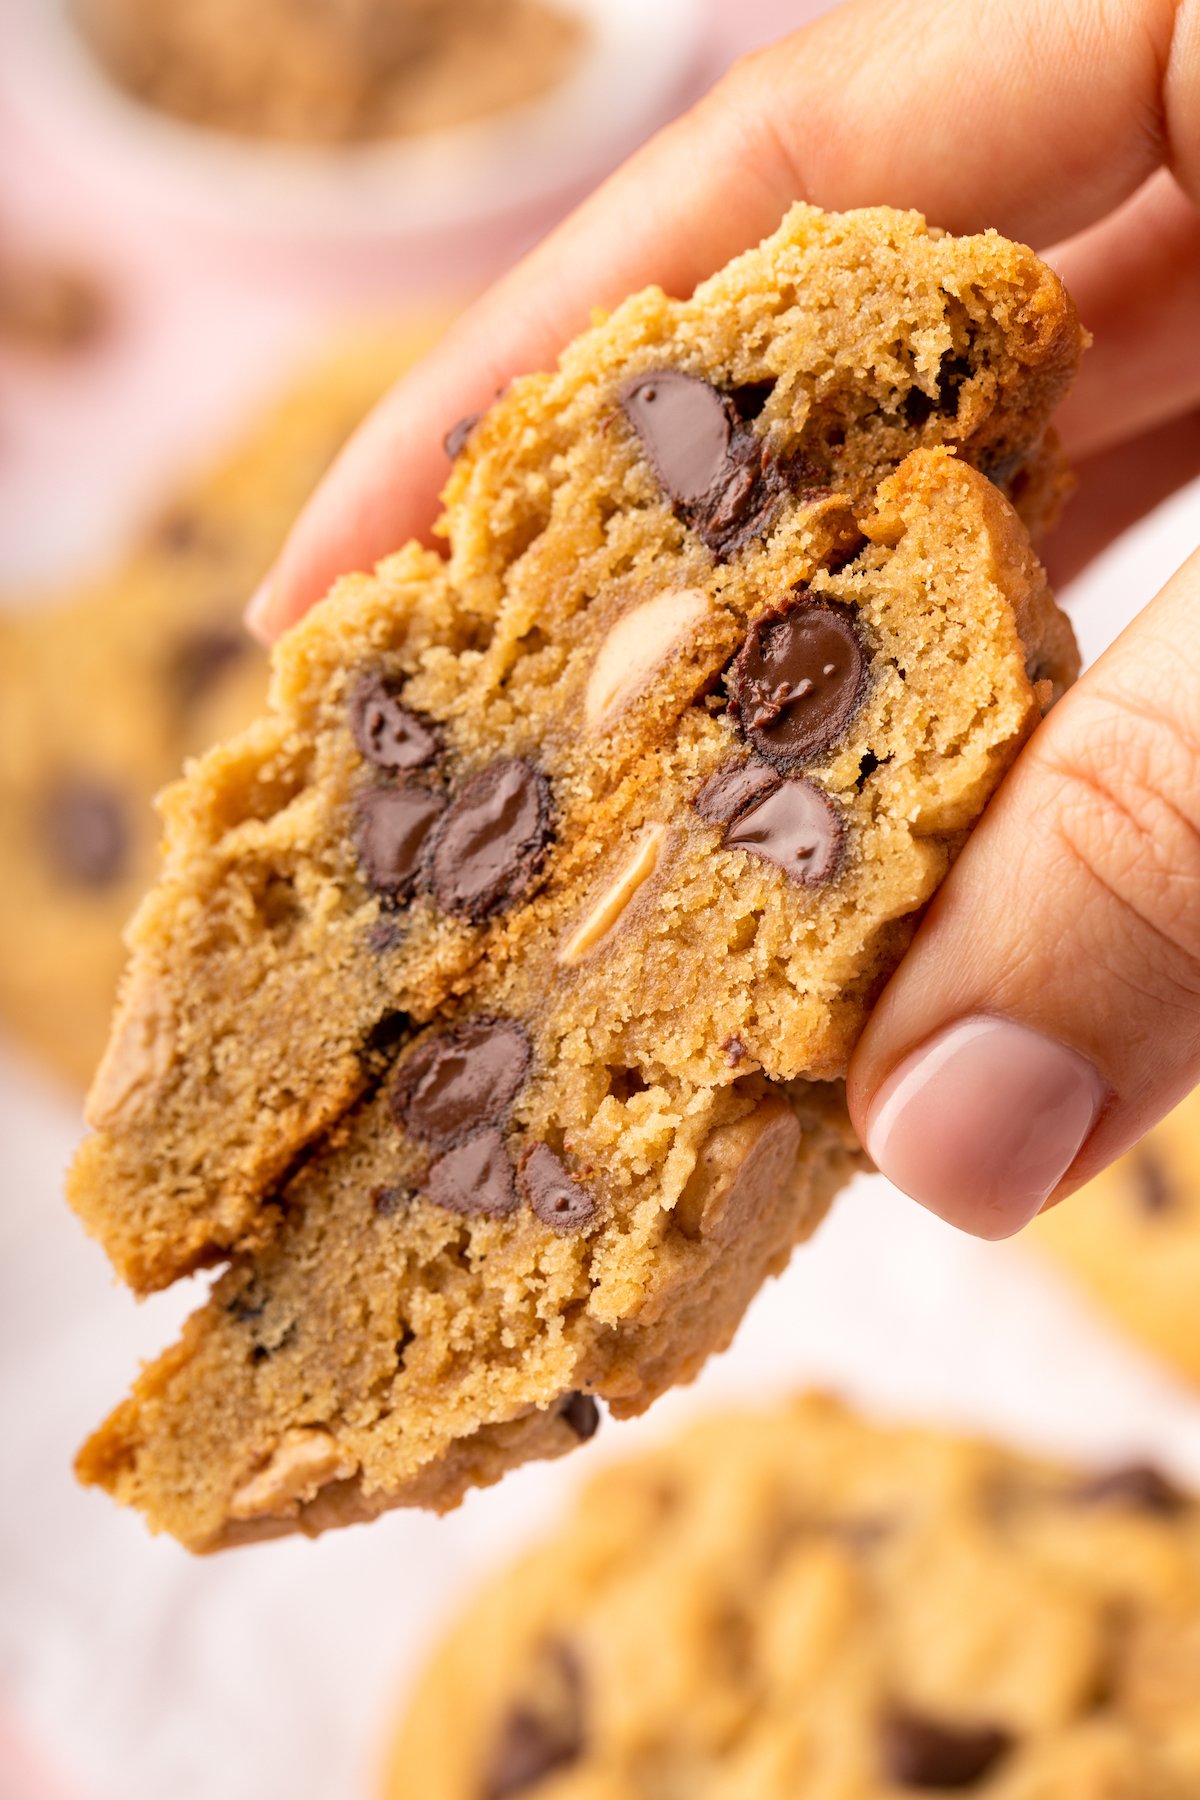 A hand holding two halves of a large cookie, cut halves facing the camera to show the cookie's texture.